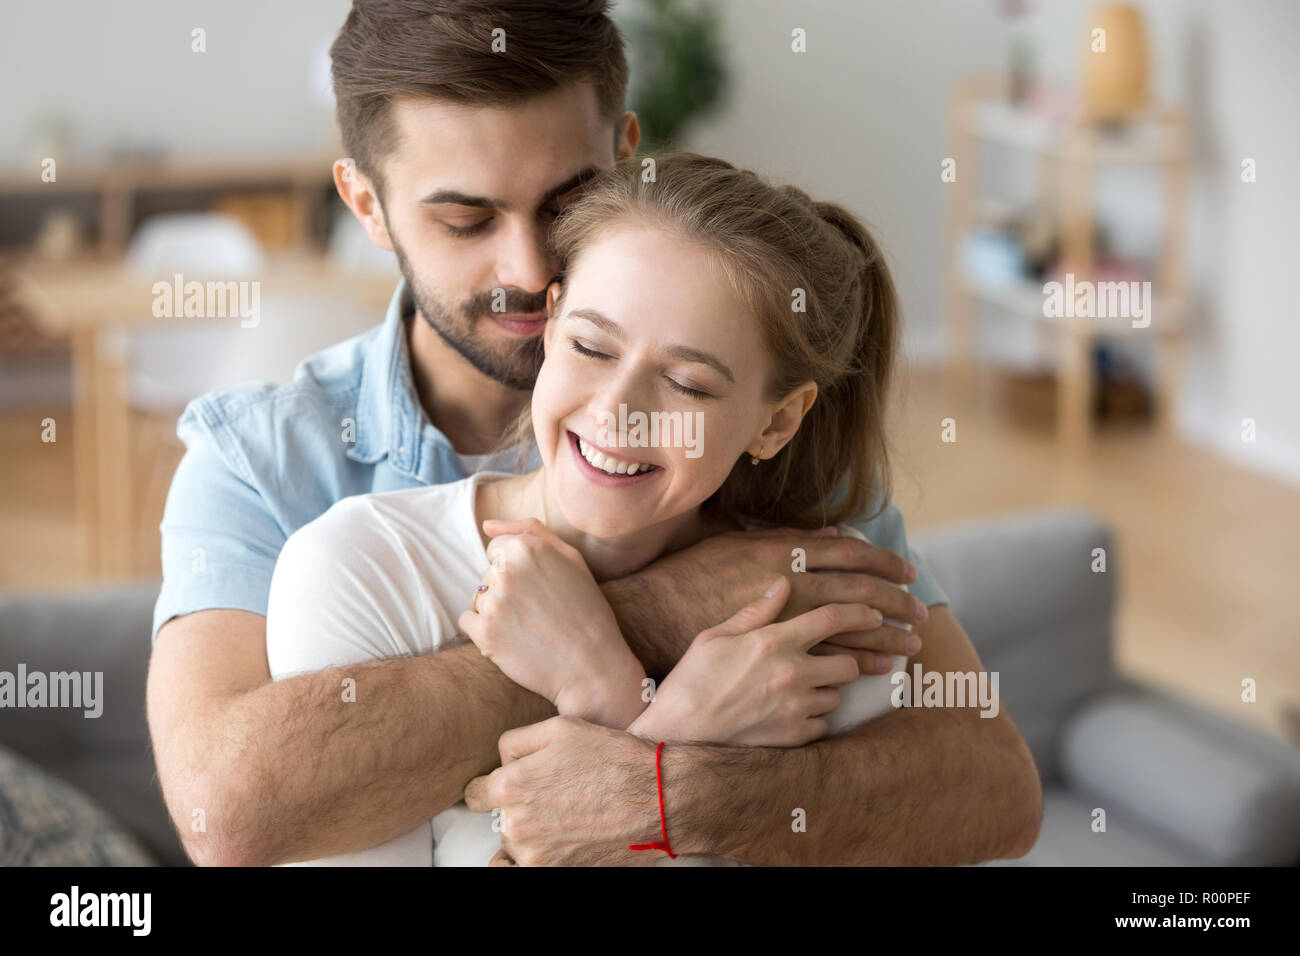 Attractive millennial happy married couple embracing indoors Stock Photo